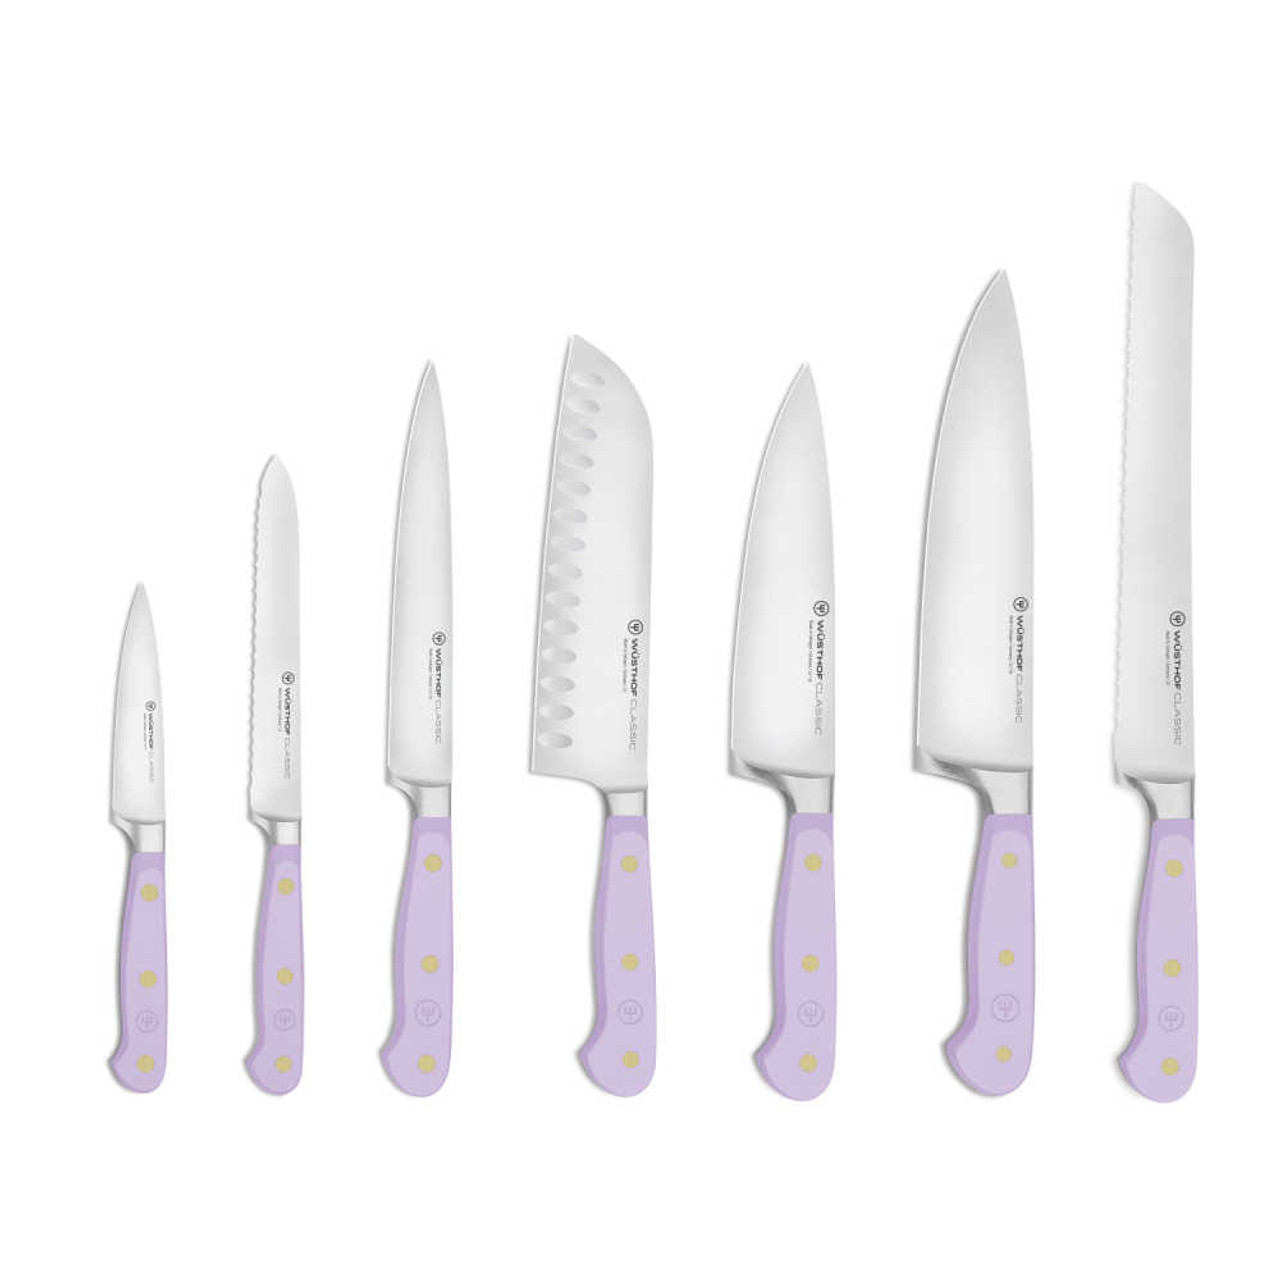 https://cdn11.bigcommerce.com/s-hccytny0od/images/stencil/1280x1280/products/5391/23397/Wusthof_Classic_Color_8-Piece_Knife_Block_Set_Purple_Yam_1__37621.1682004533.jpg?c=2?imbypass=on